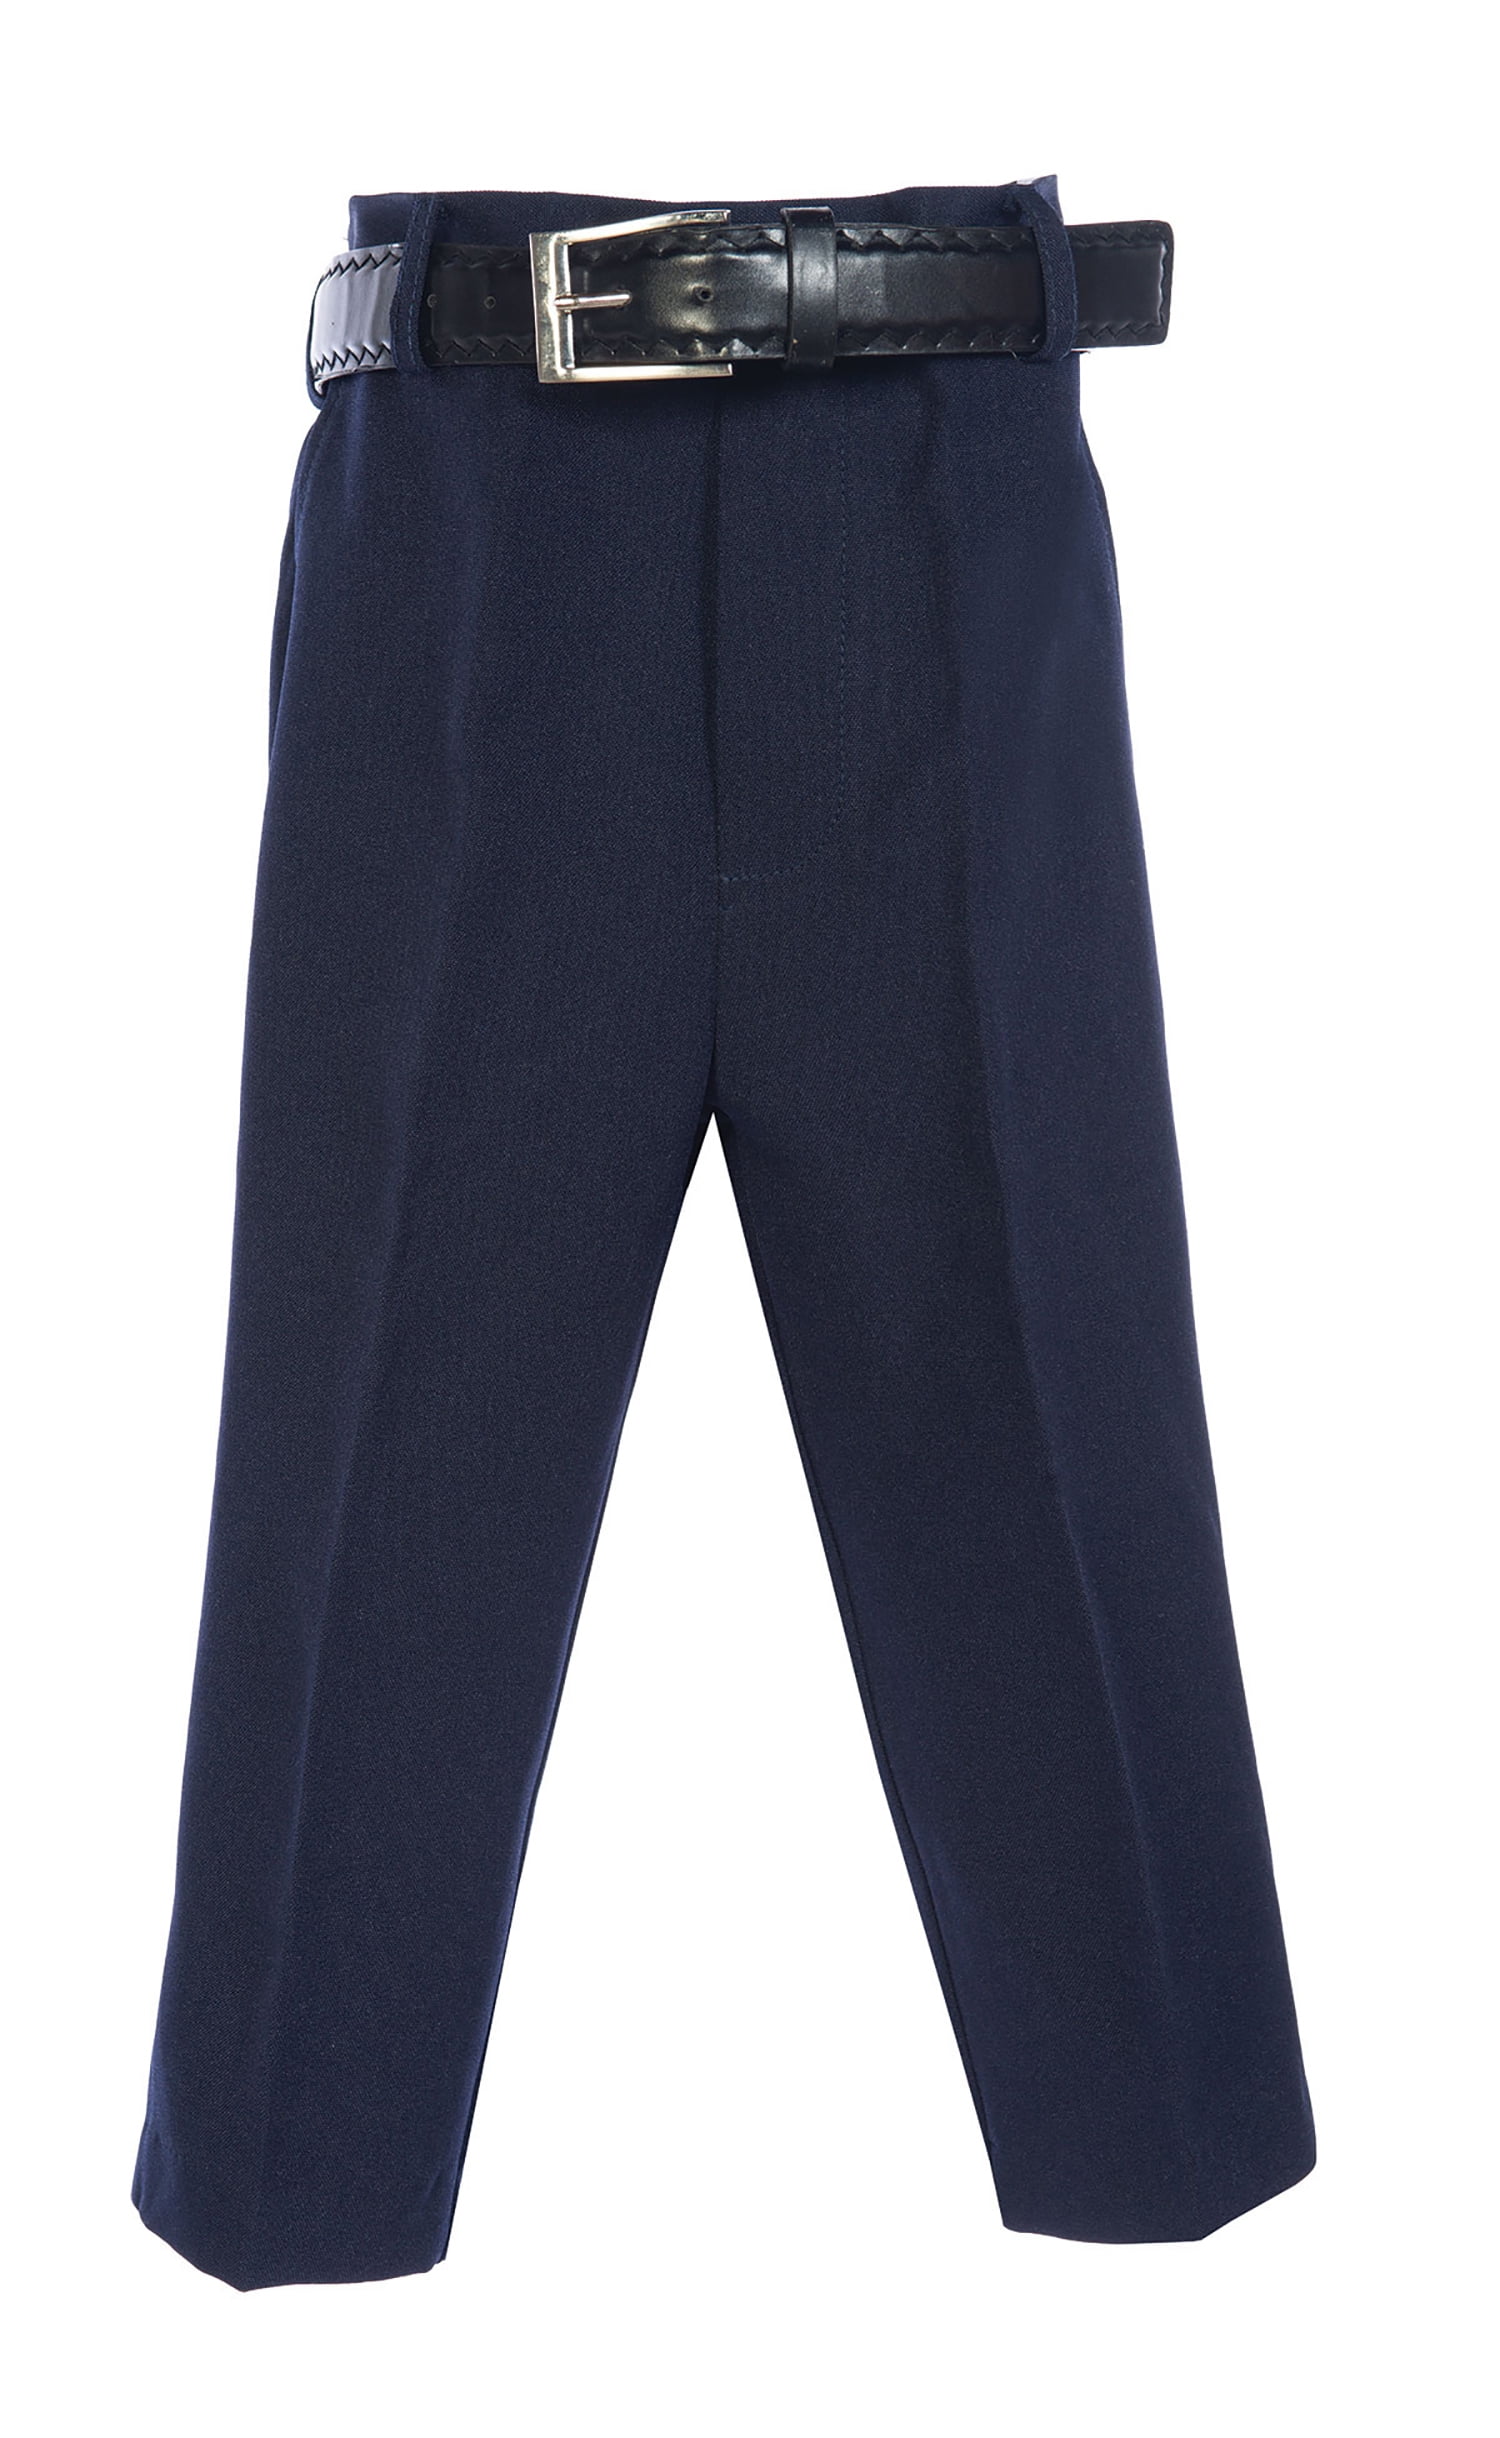 Avery Hill Boys Flat Front Dress Pants with Belt 